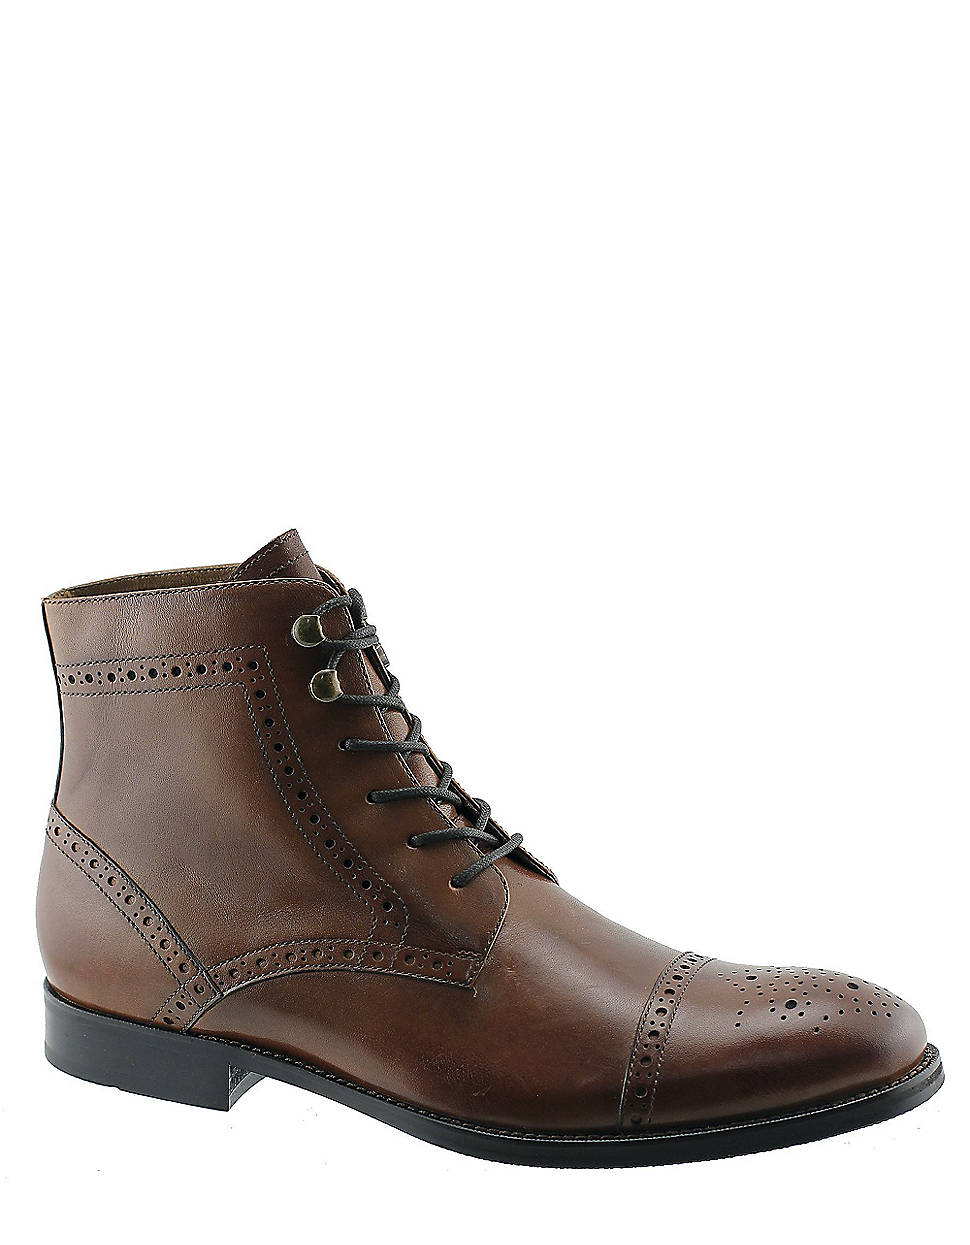 Johnston & Murphy Tyndall Leather Cap Toe Boots in Brown for Men - Lyst